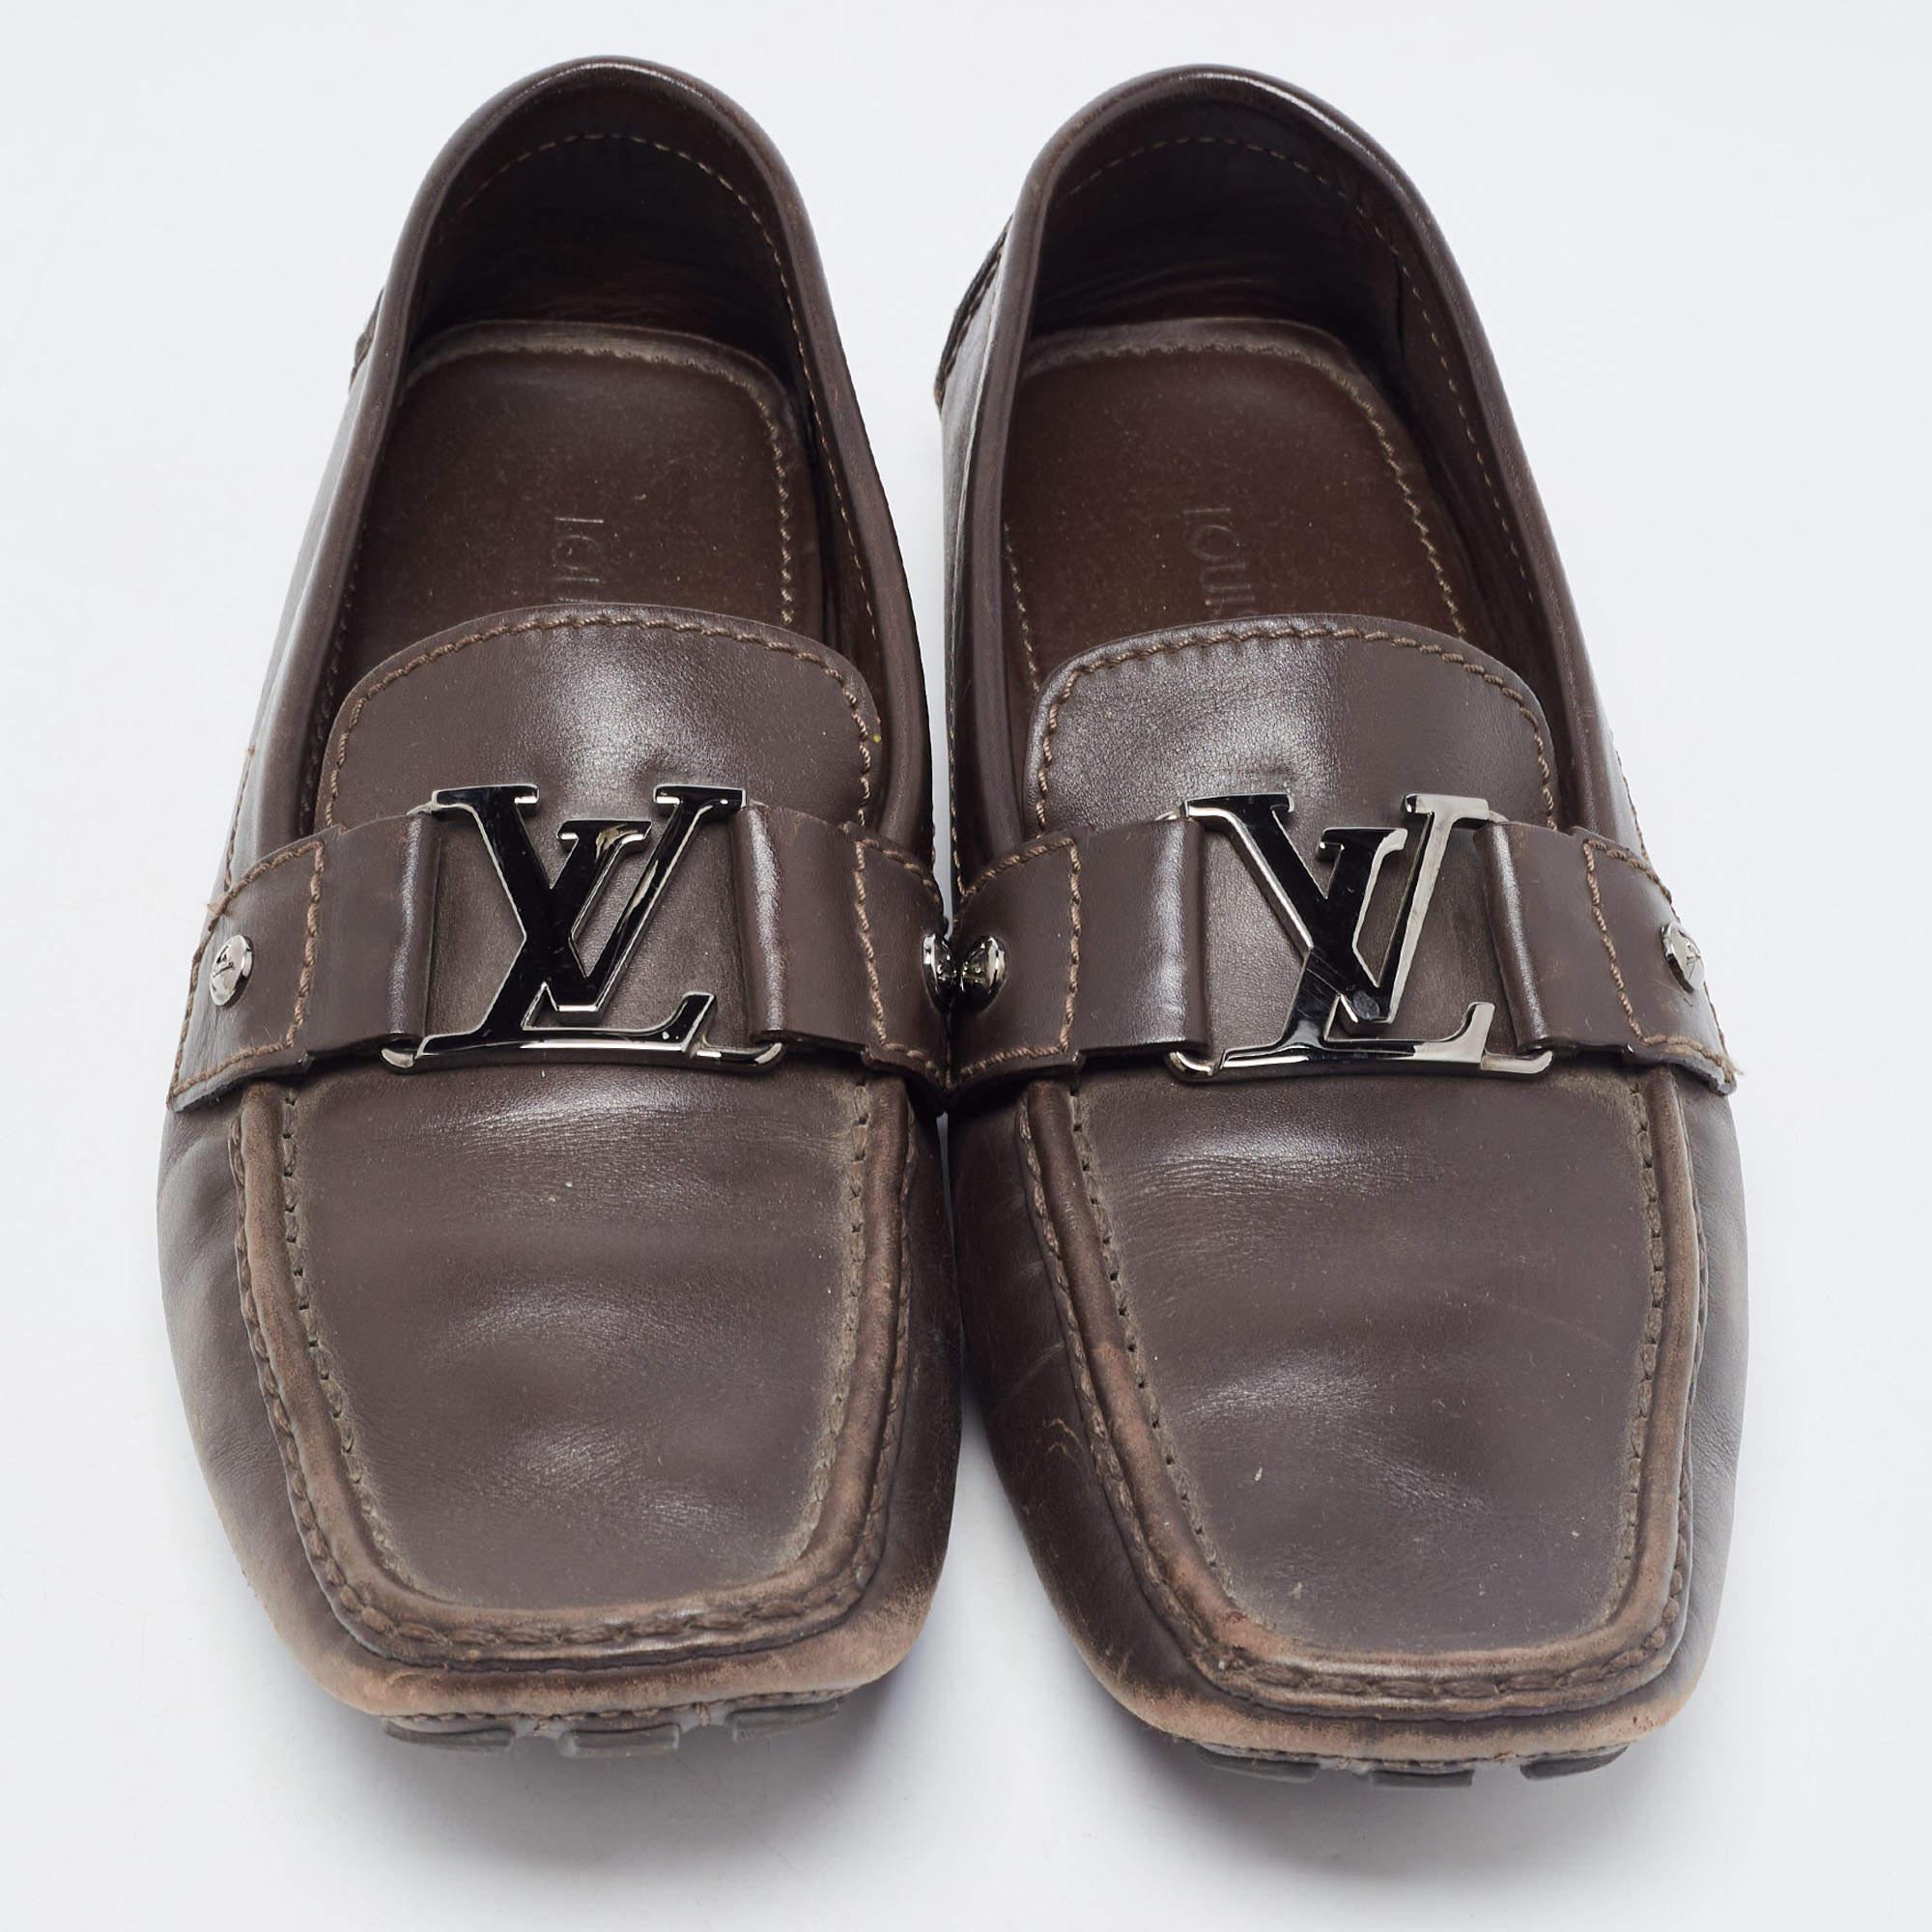 Practical, fashionable, and durable—these Monte Carlo loafers are carefully built to be fine companions to your everyday style. They come made using the best materials to be a prized buy.

Includes: Original Dustbag

